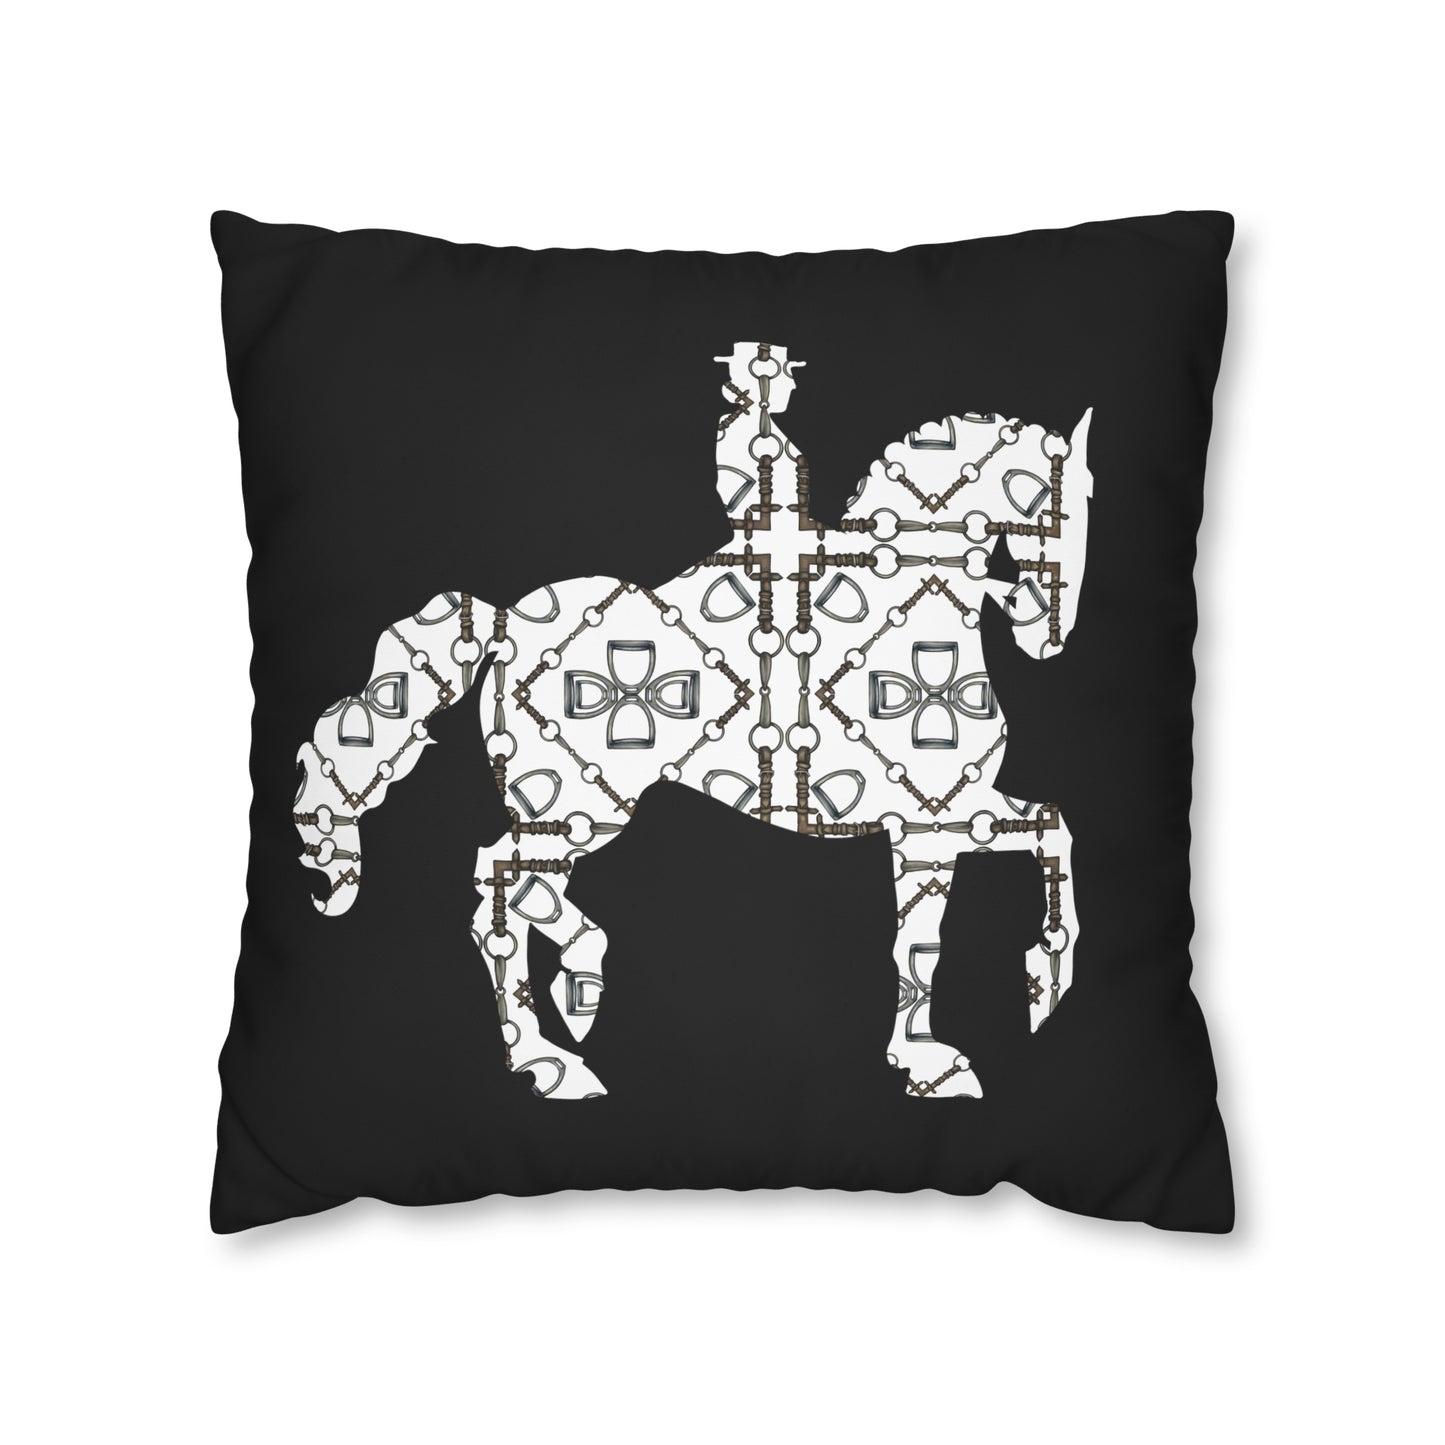 Double Sided Black and White Dressage Horse Pillow Case